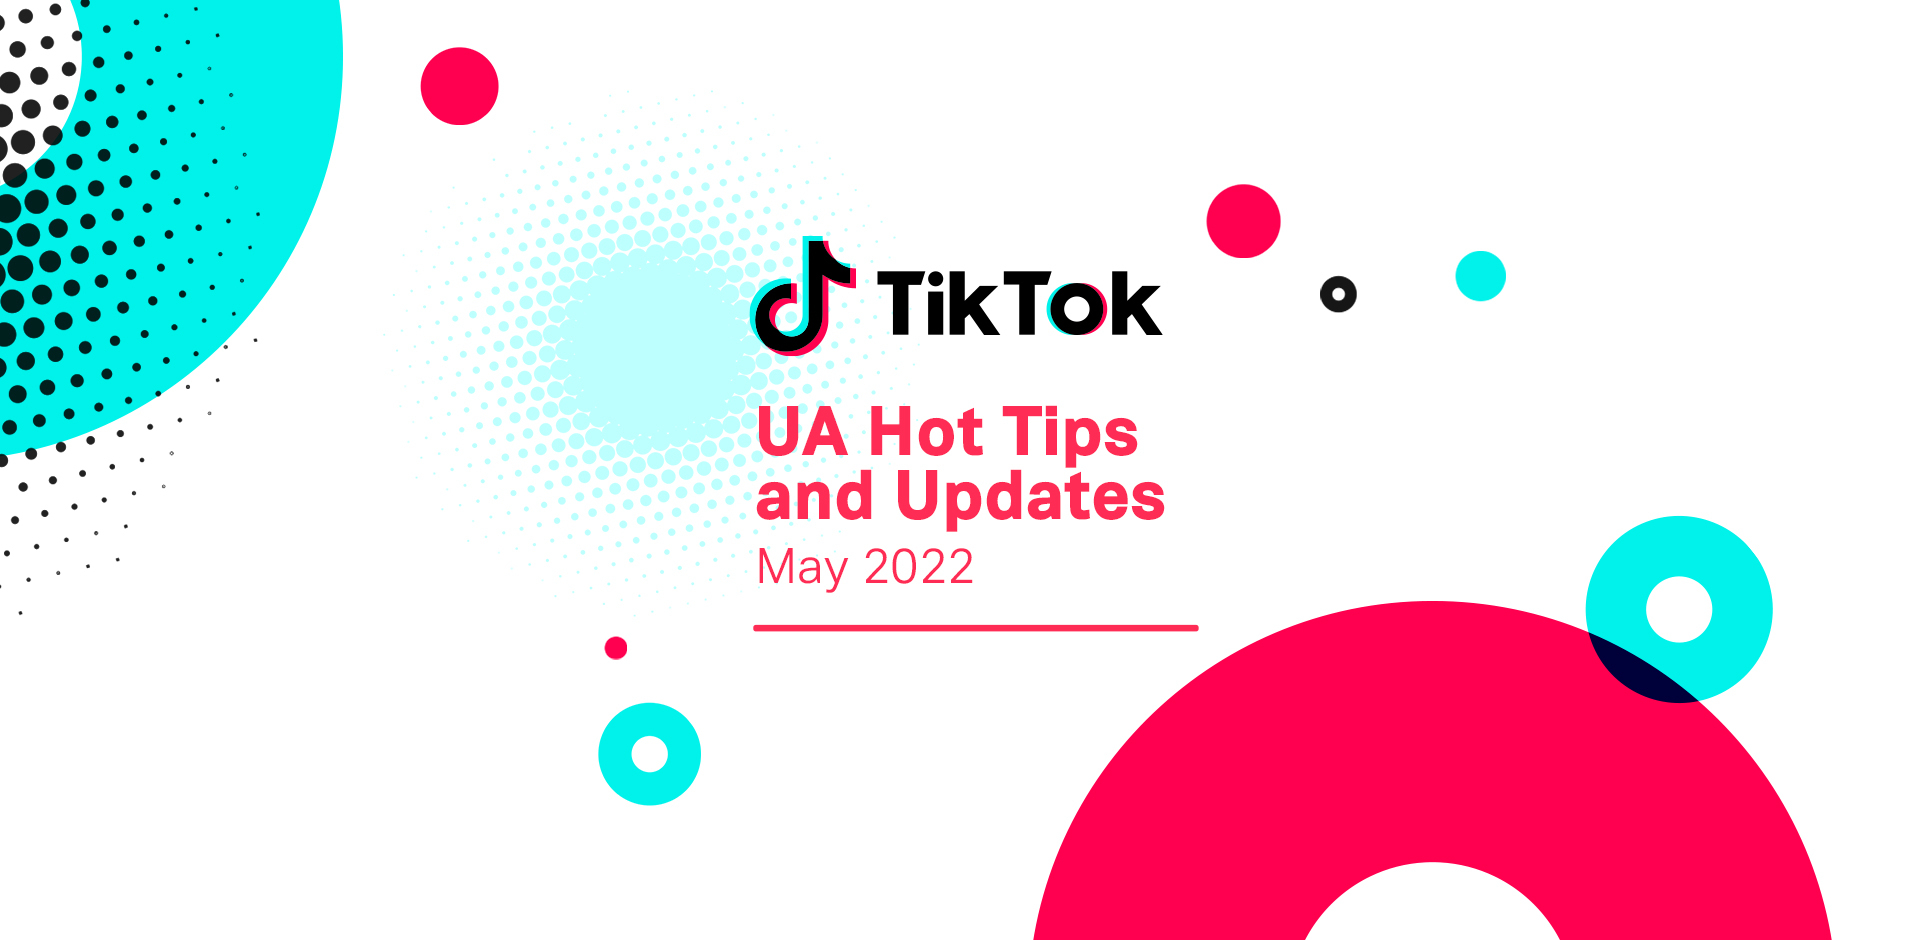 TikTok UA Hot Tips and Updates for May 2022